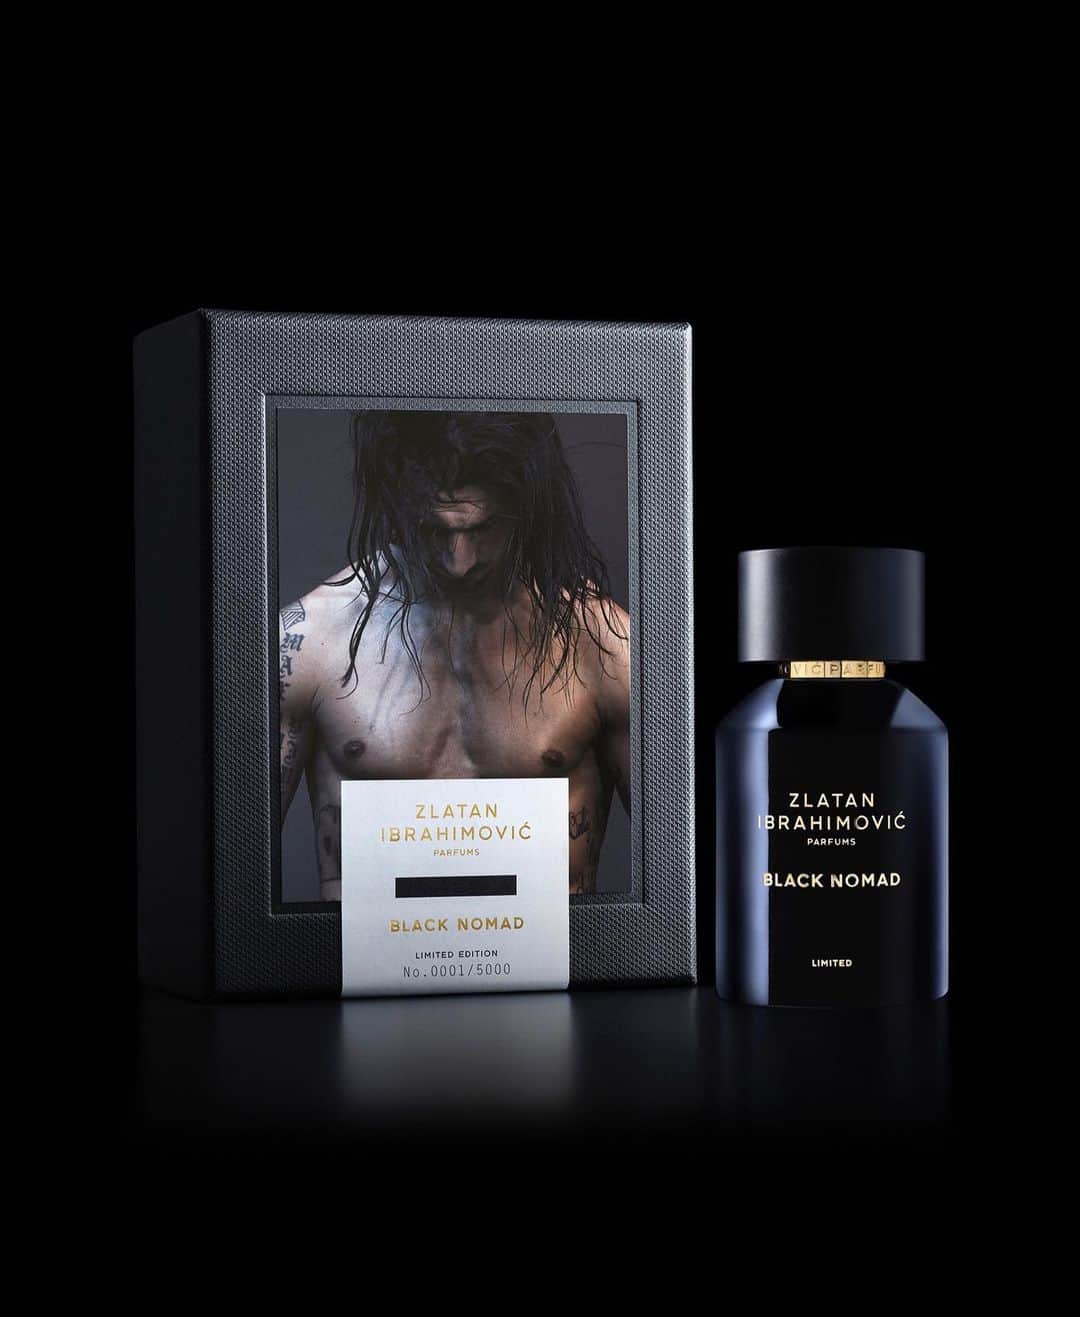 Zlatan Ibrahimović Parfumsのインスタグラム：「BLACK NOMAD - Craftsmanship and tactility inside and out, from the box and the bottle to the scent on the skin. Limited edition in its own exclusive numbered box. BLACK NOMAD is intense and complex, a dominant fragrance that takes charge and stirs up emotions.  Explore more through link in bio.」